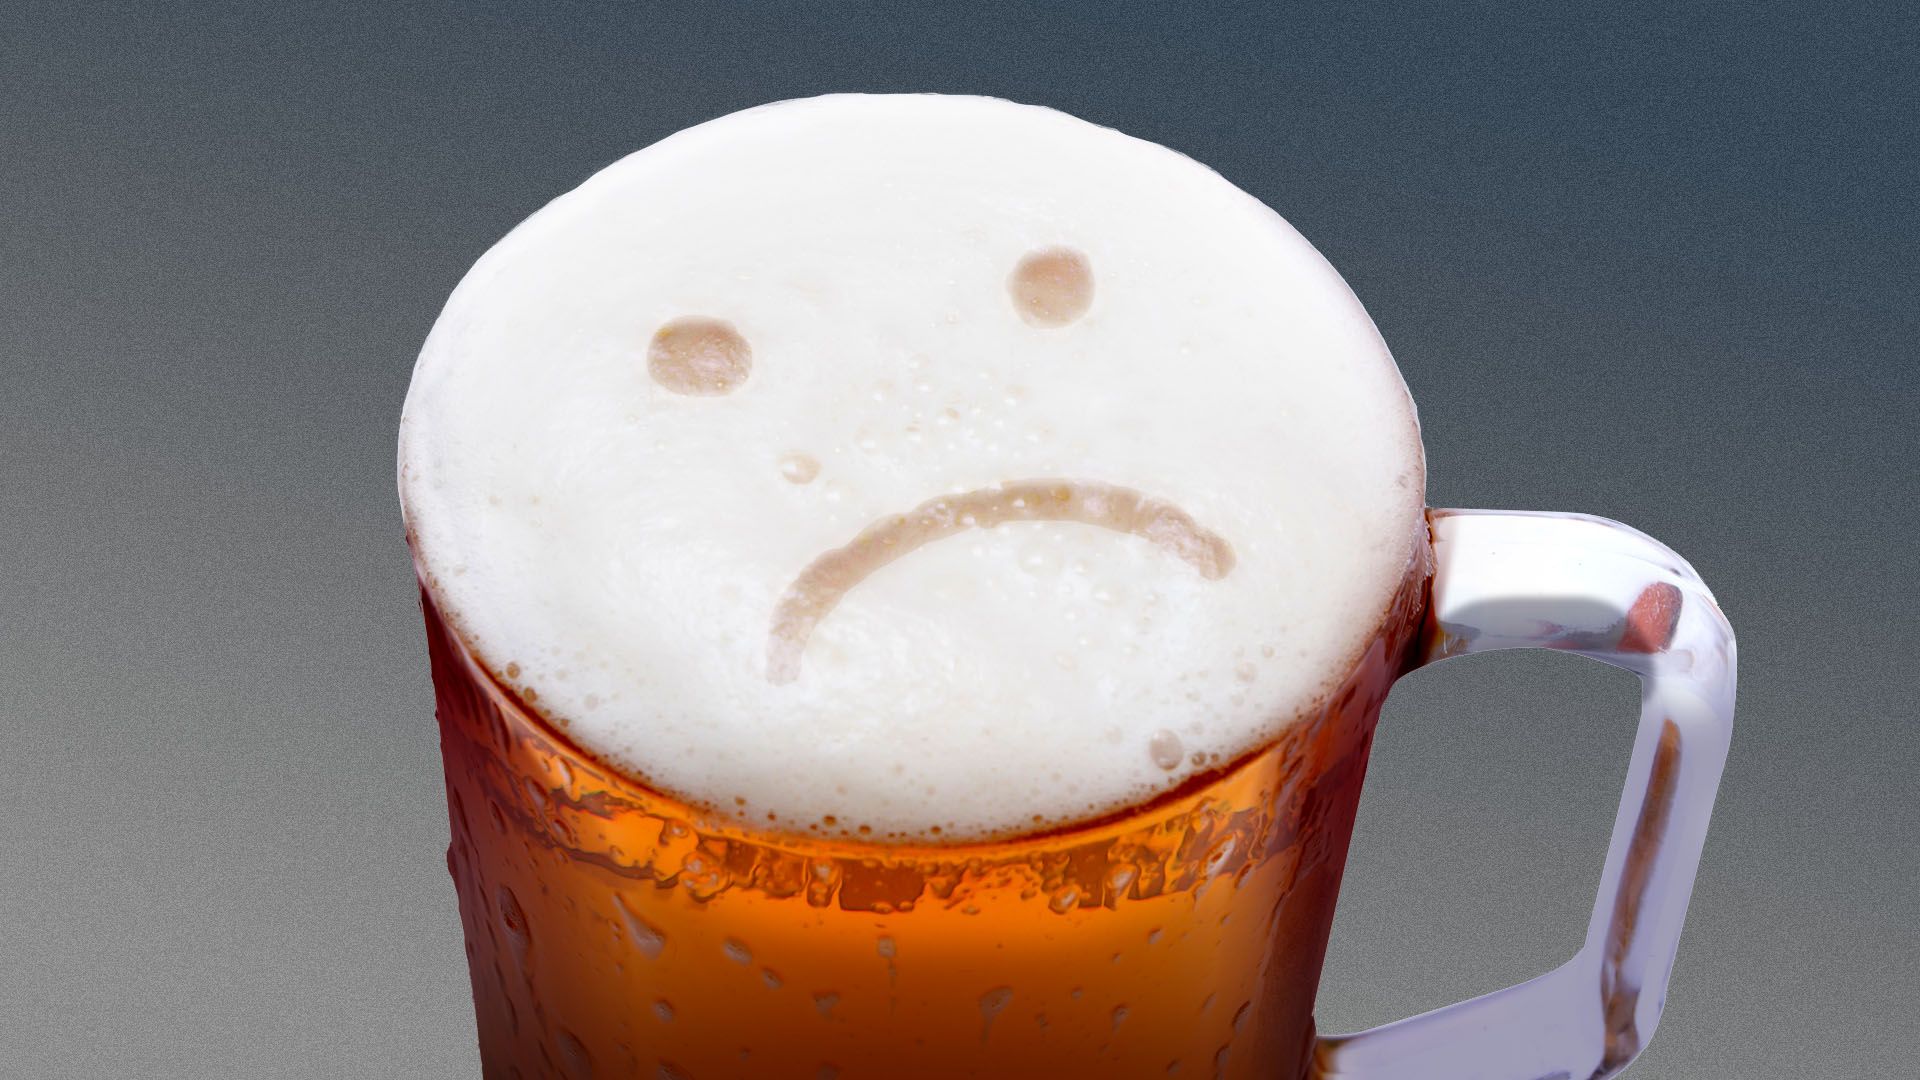 Illustration of a mug of beer, with a sad face in the foam